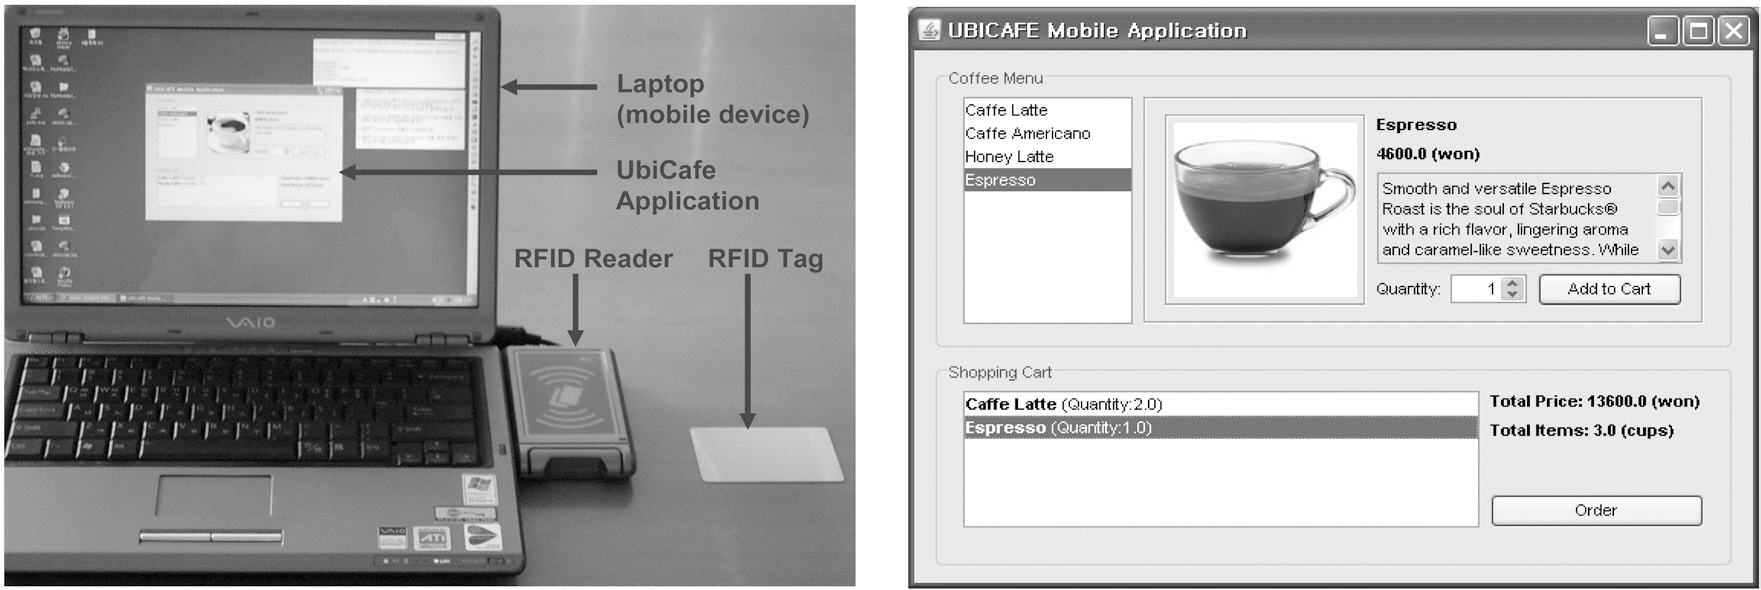 UbiCafe application. The left picture is hardware prototype of customer’s mobile device for UbiCafe application and the right snapshot is a graphicaluser interface for a customer.